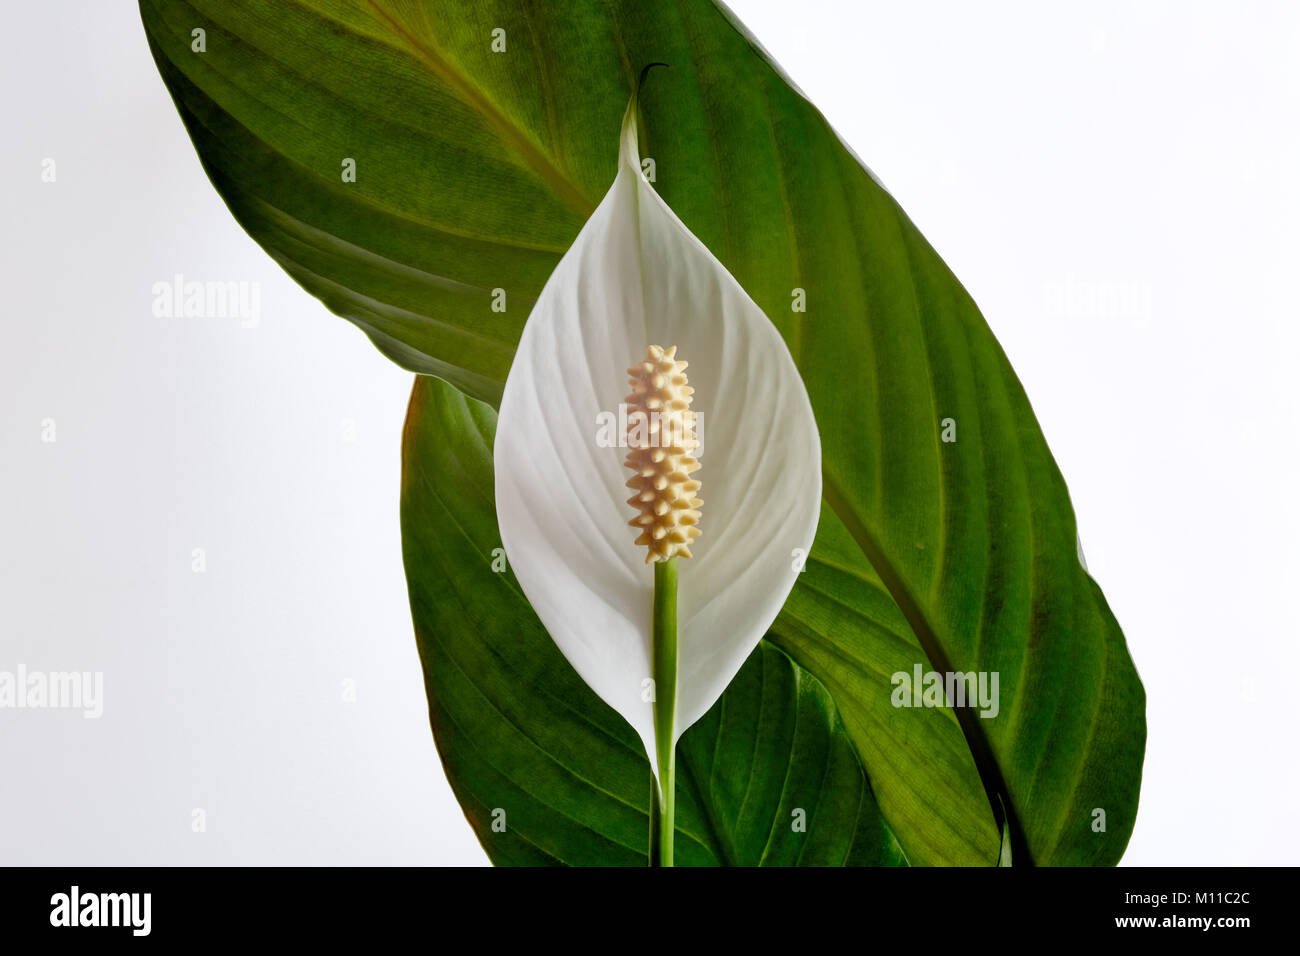 A photograph of a peace lily with leaves curving behind the flower. Stock Photo